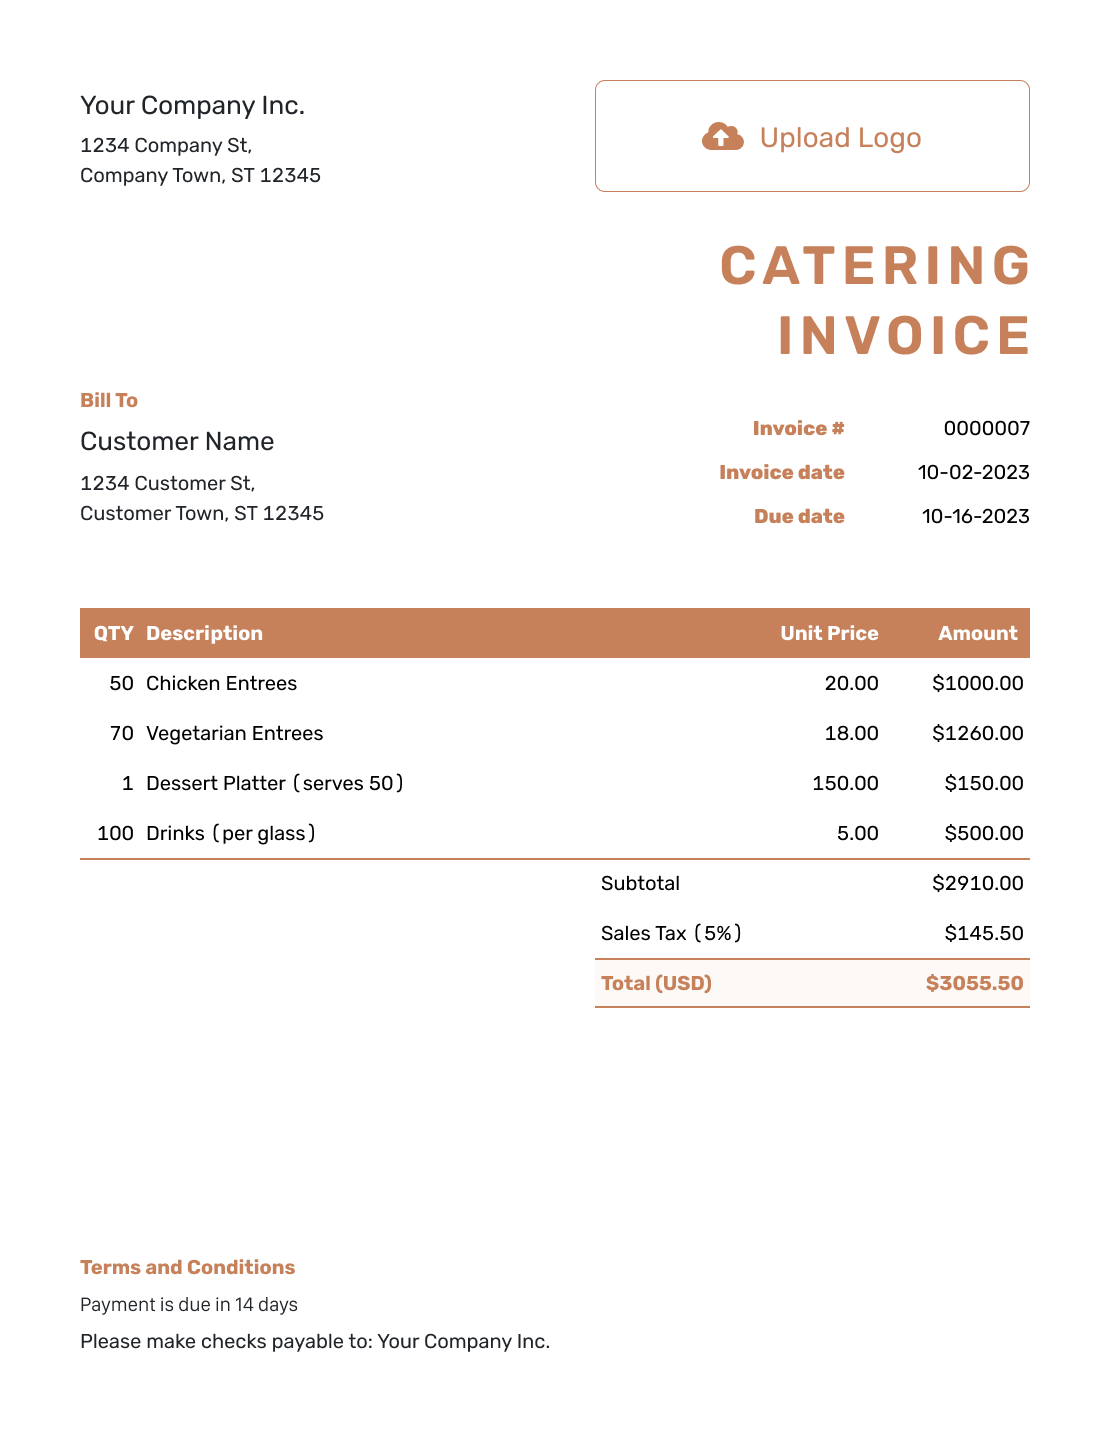 Standard Catering Invoice Template